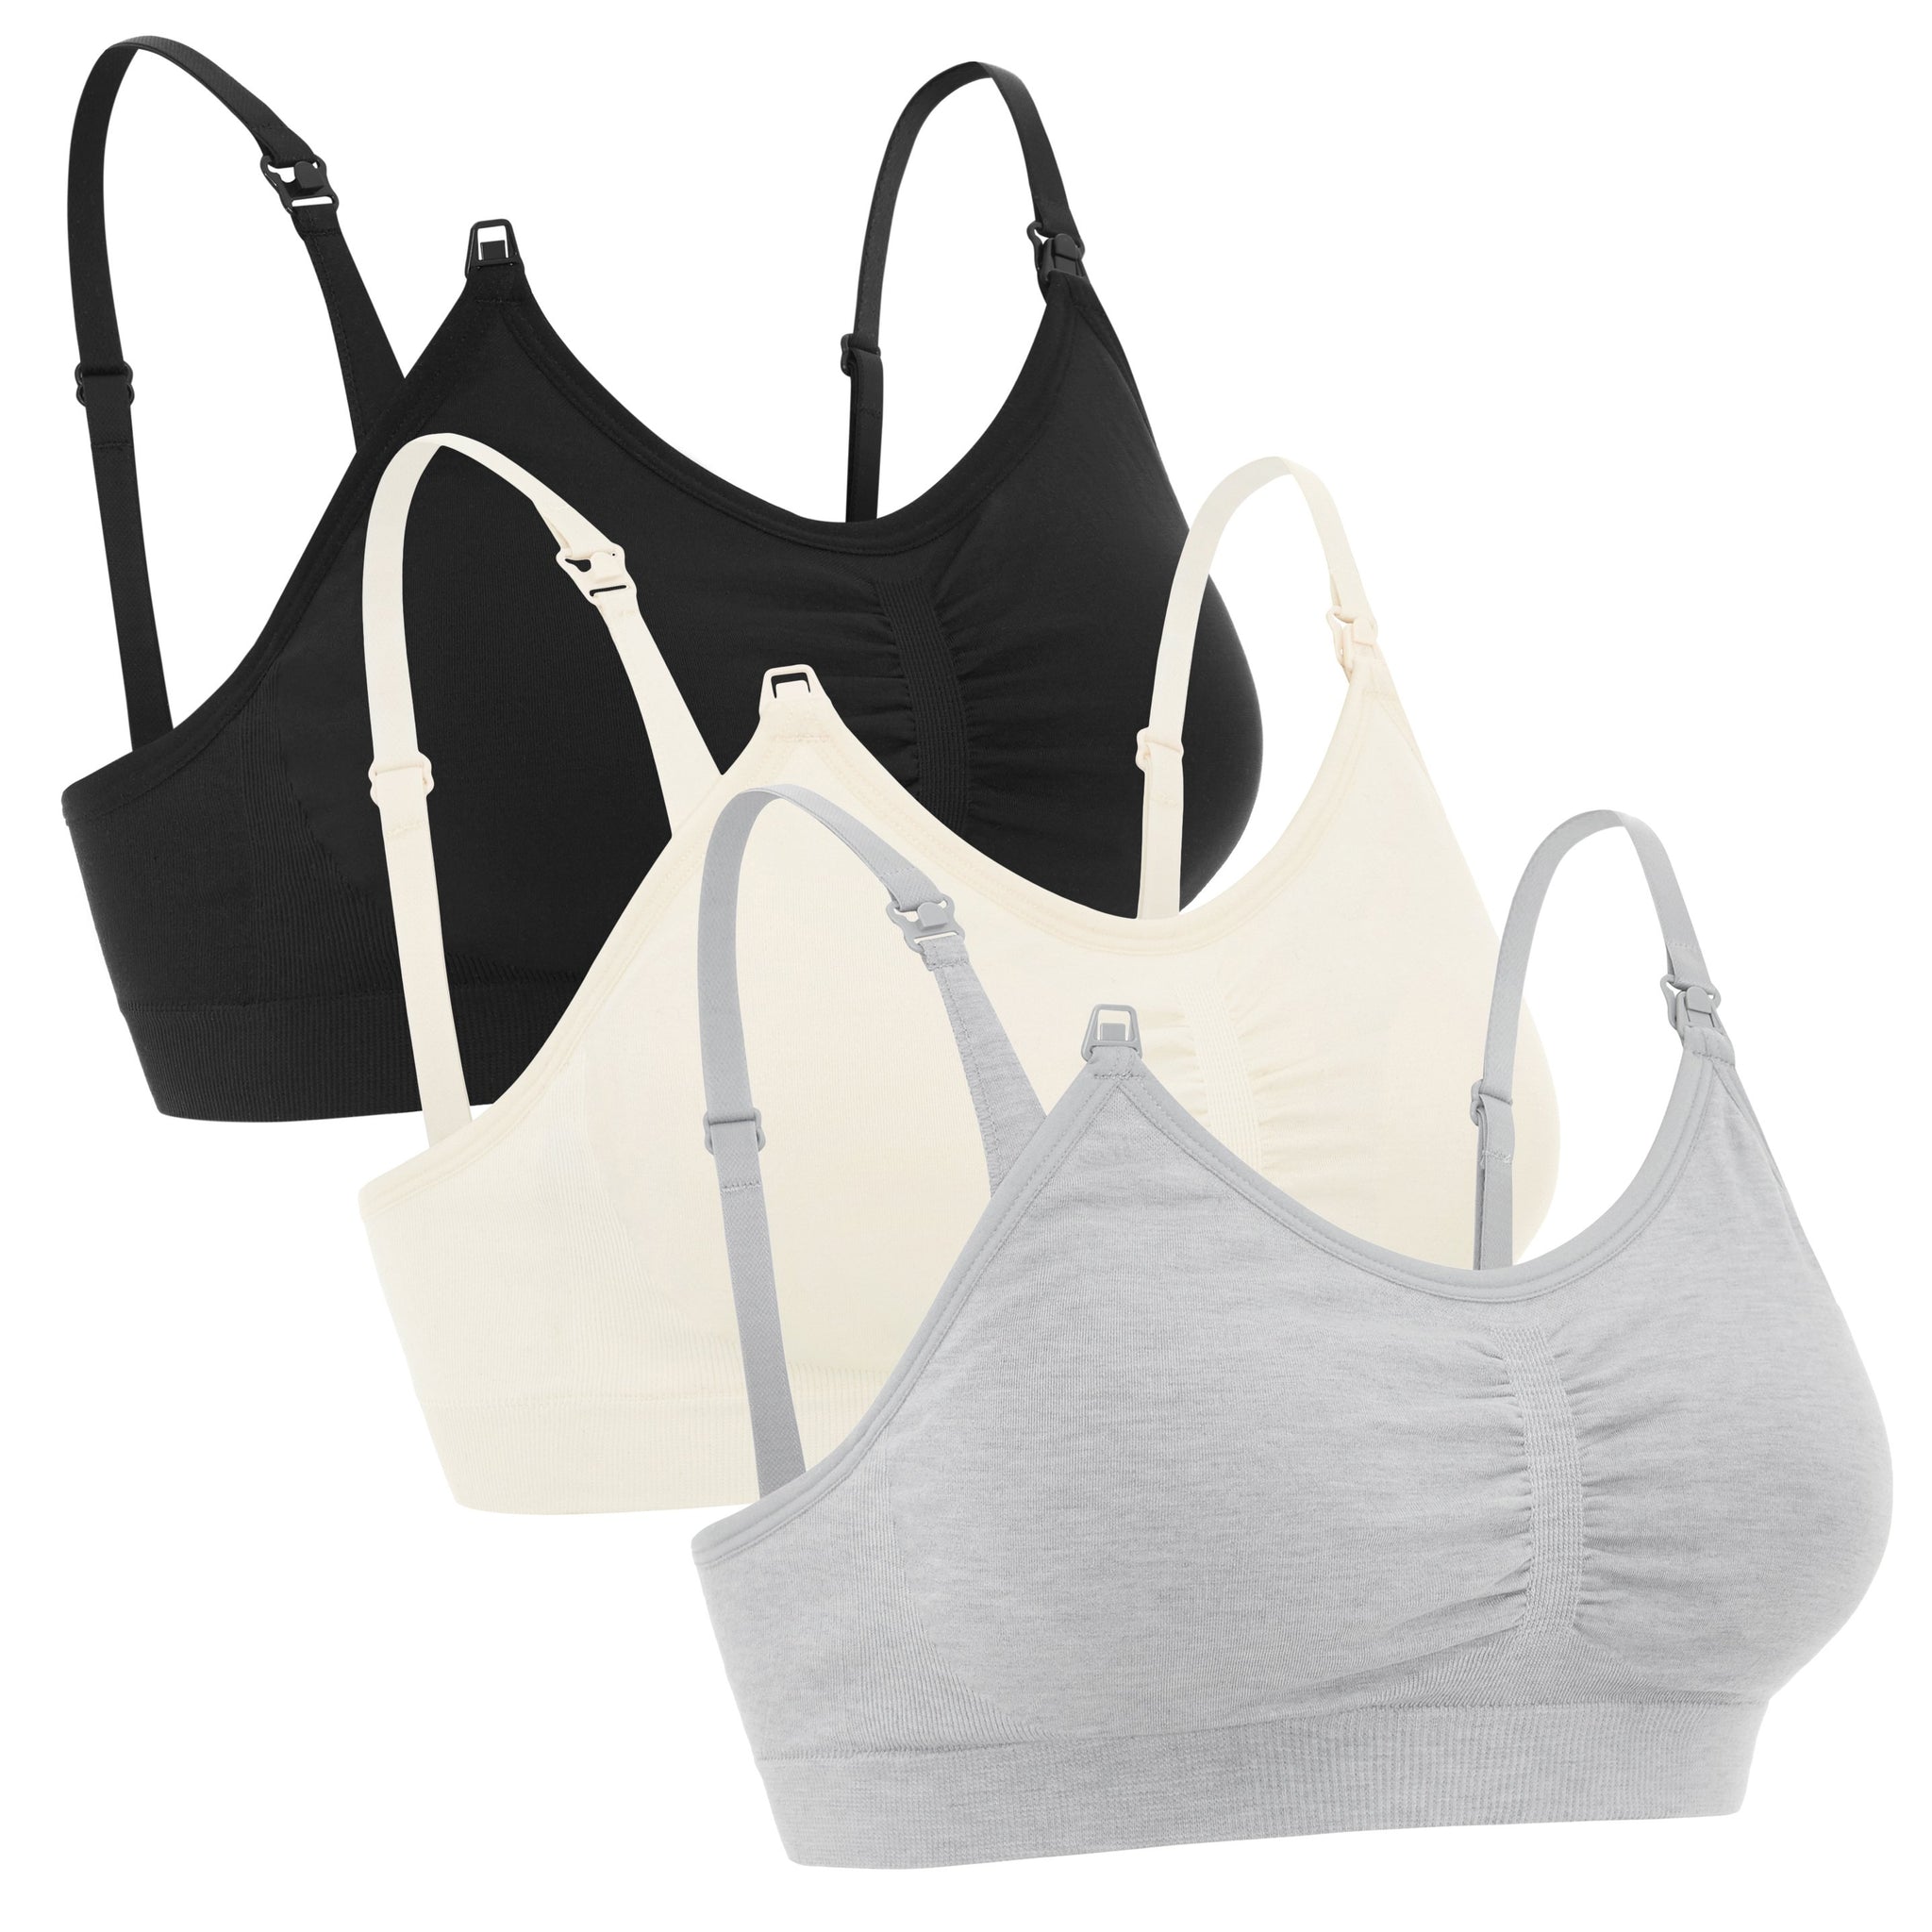 Maternity Nursing Bra Super Soft and Comfy Come with Free Hook